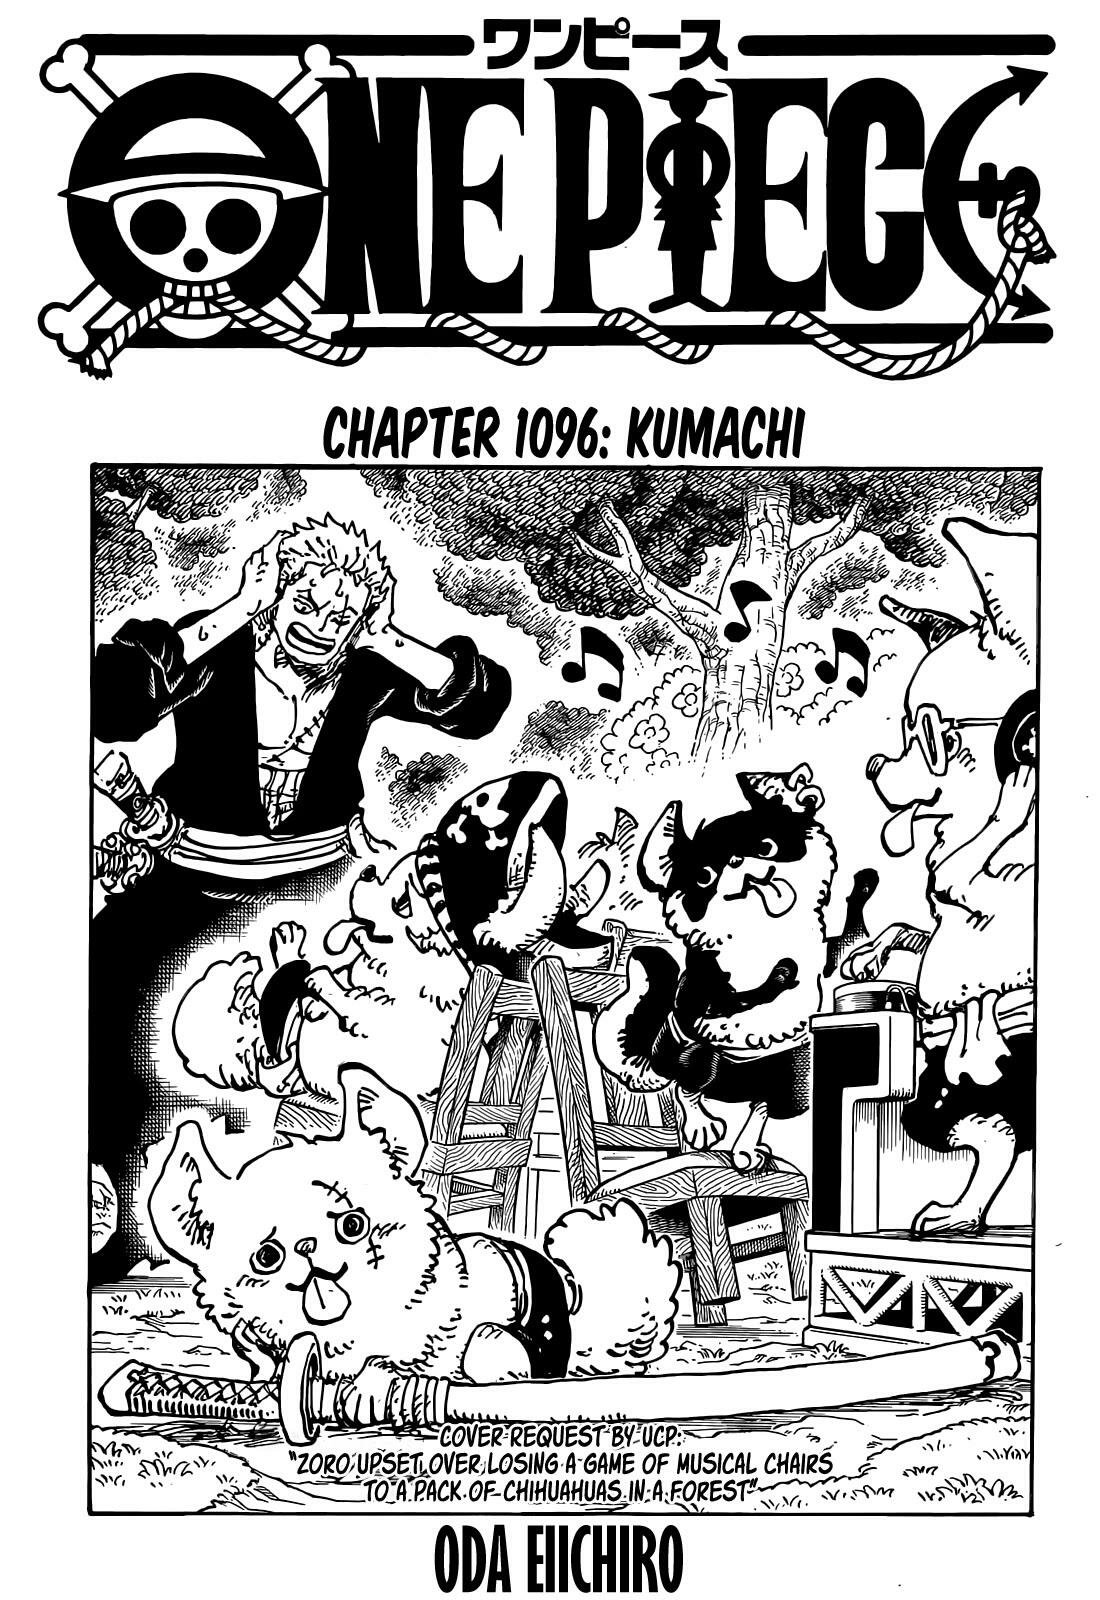 One Piece Chapter 1070: Luffy may declare the Island as Vegapunk's  territory